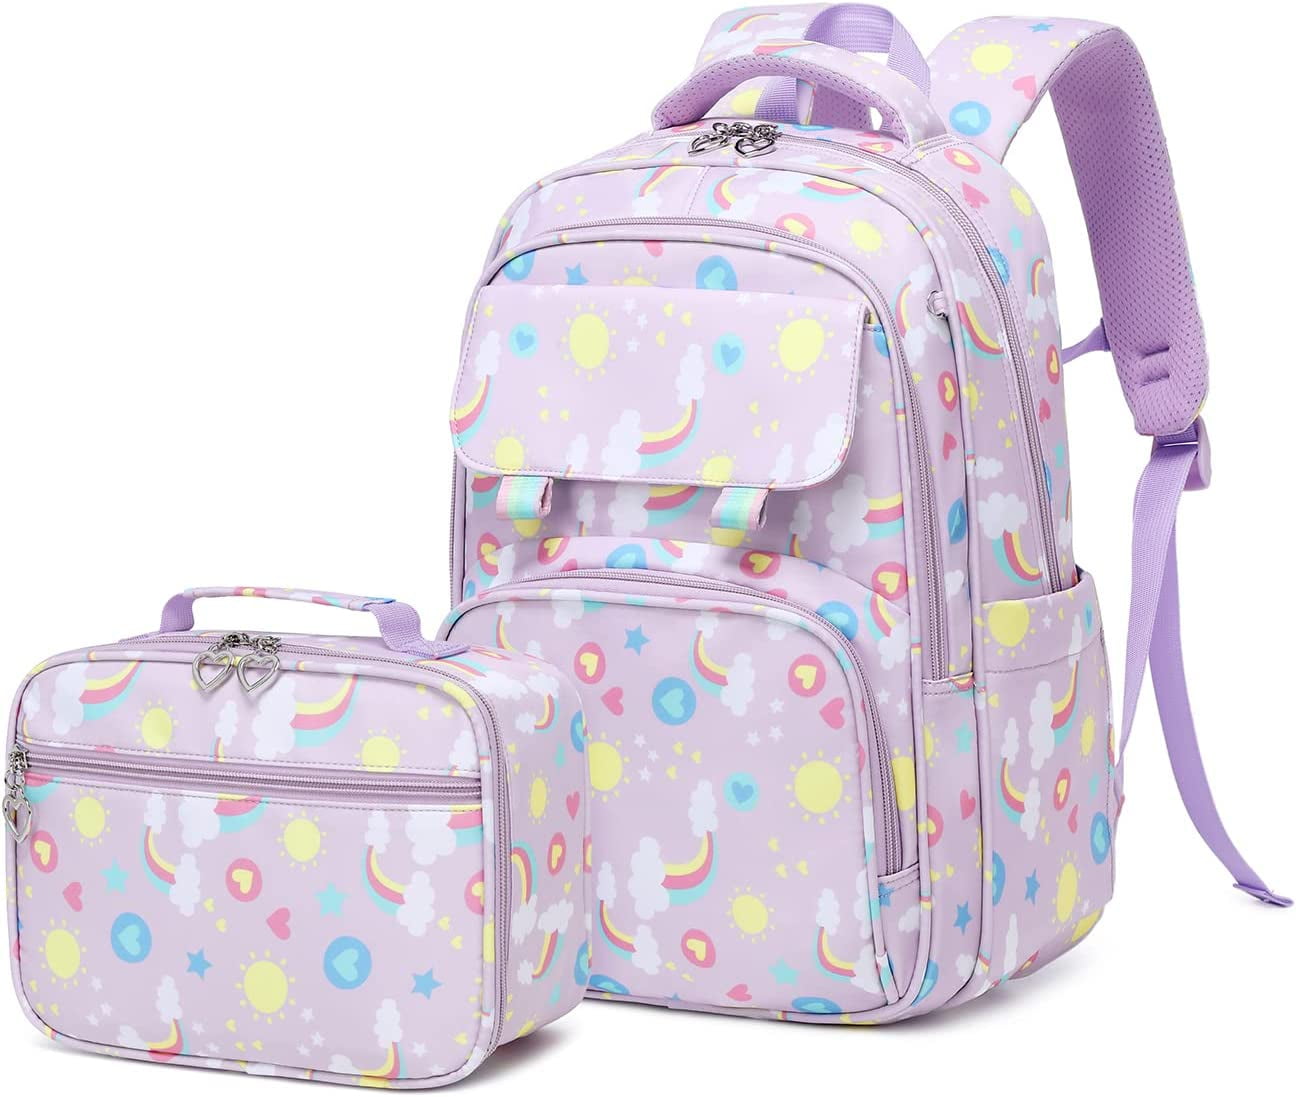 Primary School Bags For Girls Pink Cute Princess Middle School